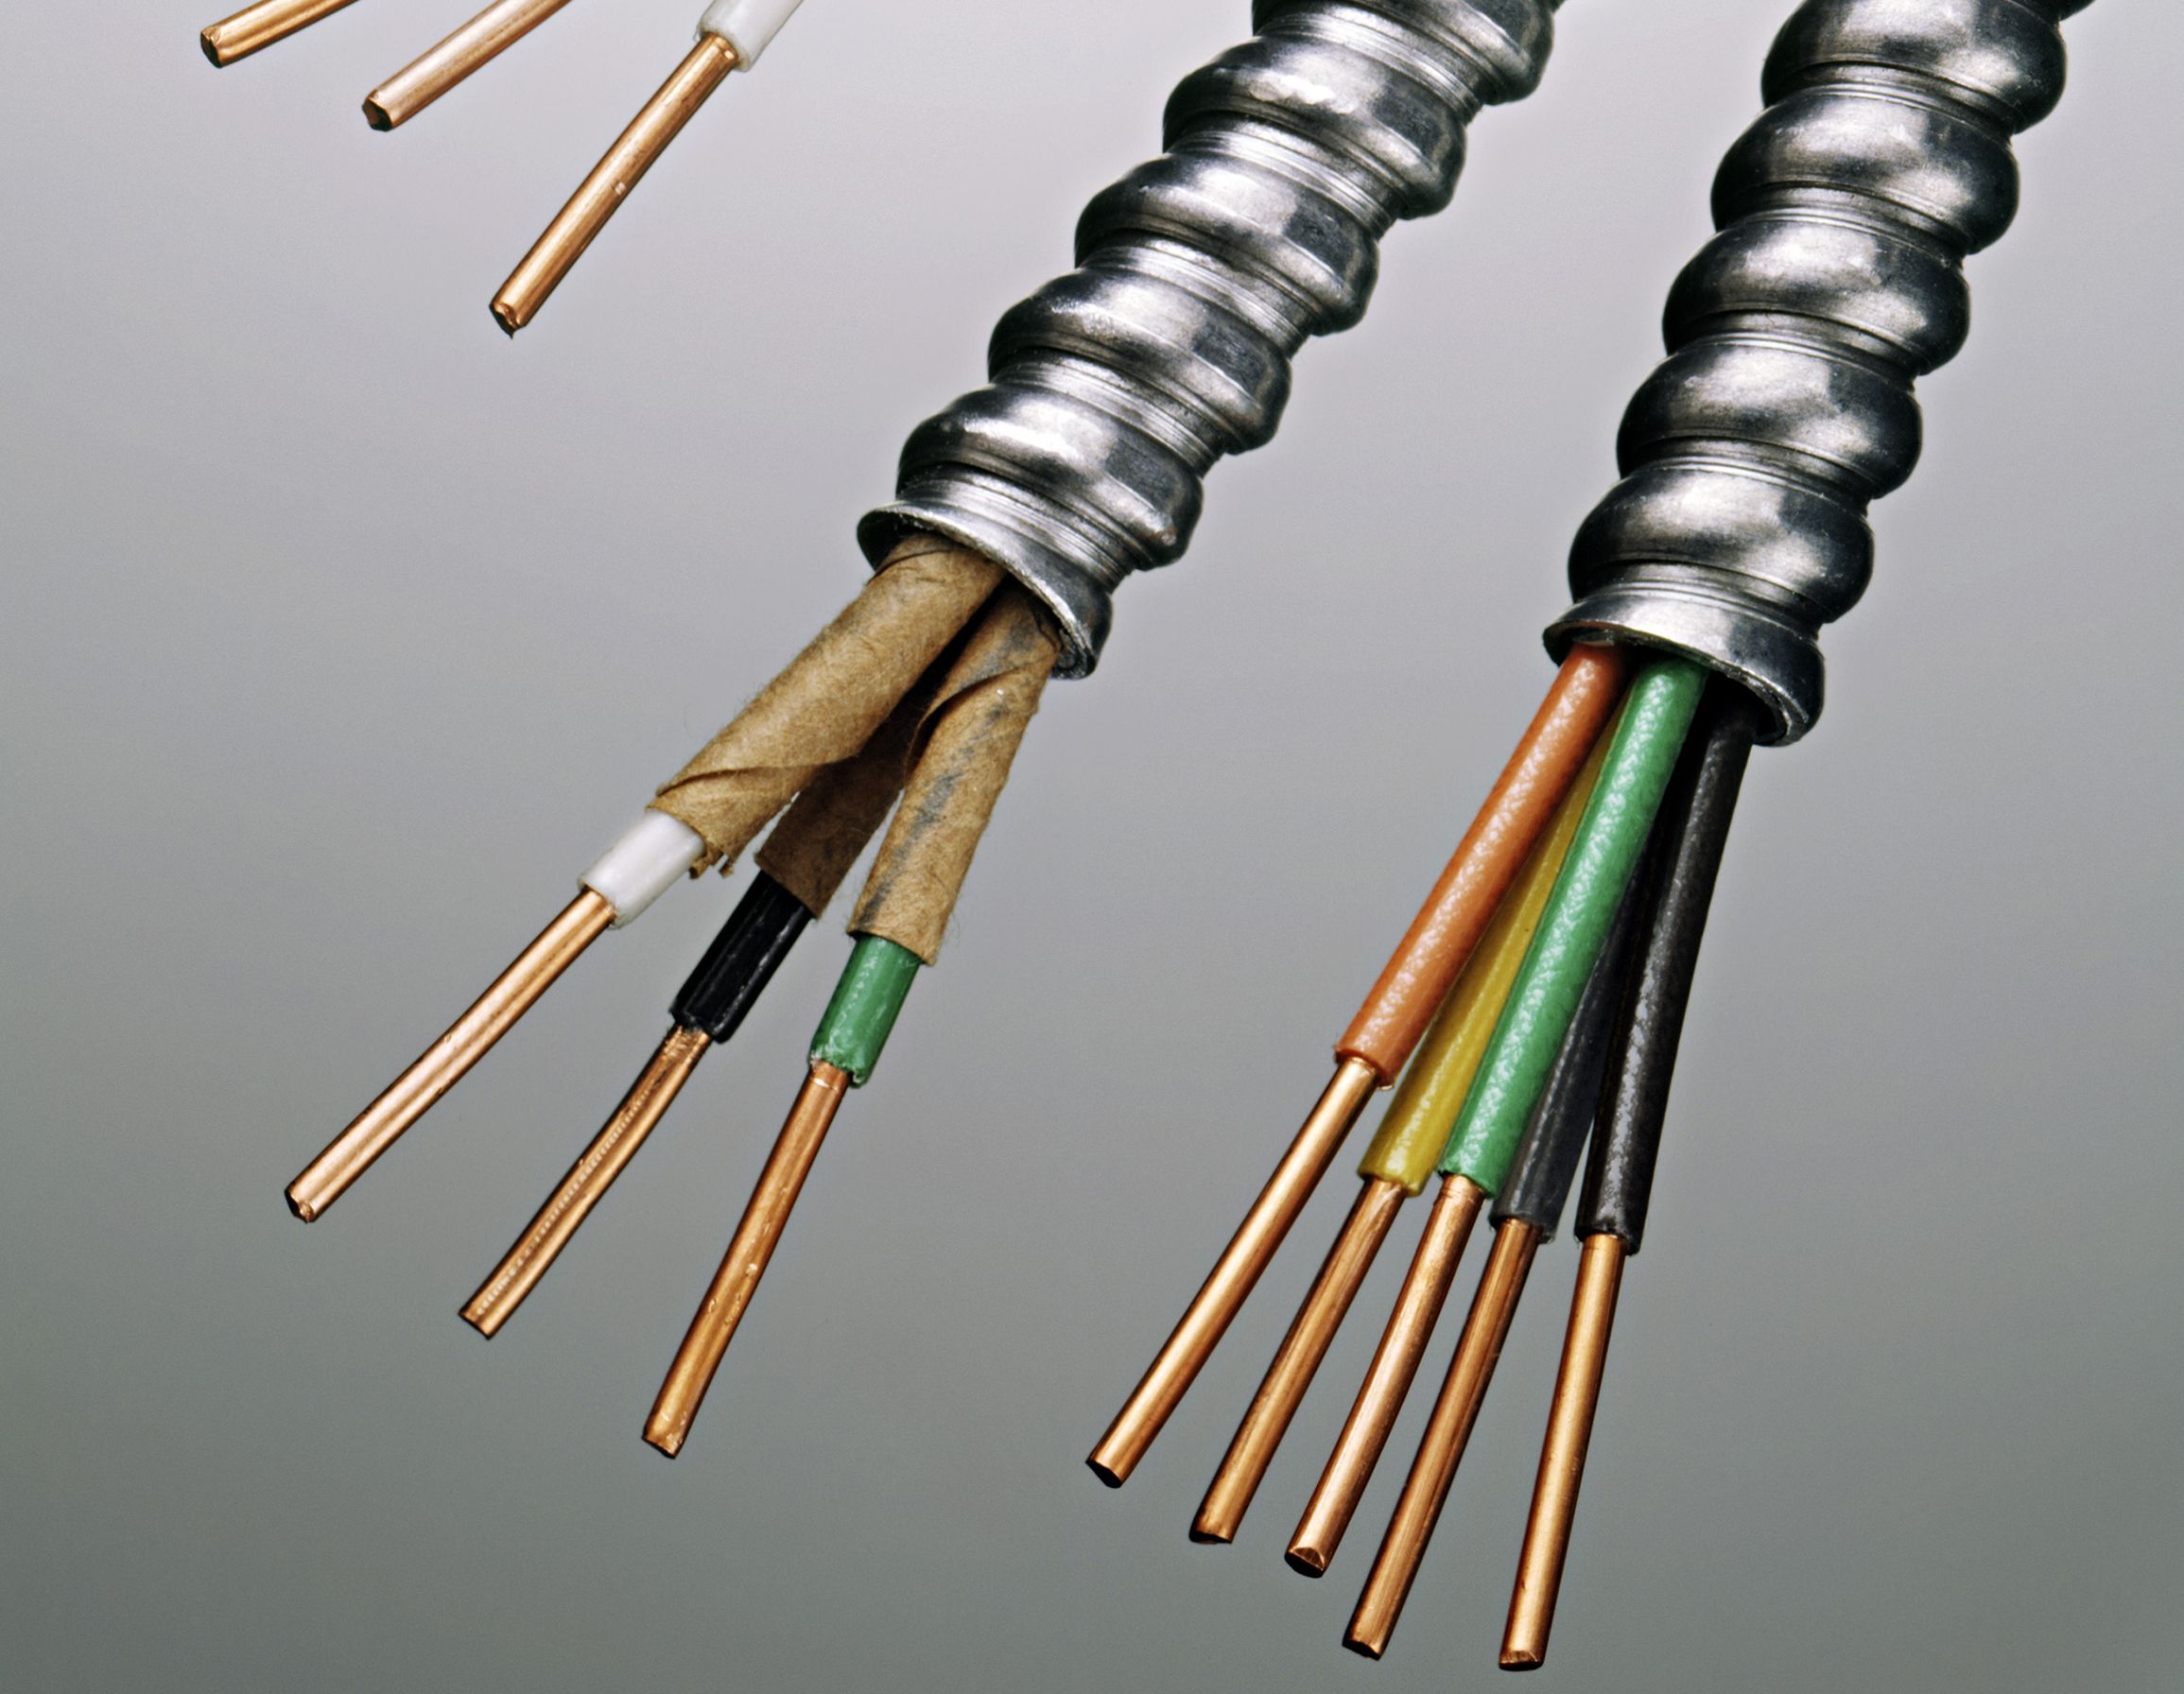 BX Cable - Comprehensive Guide to Armored Electrical Wire